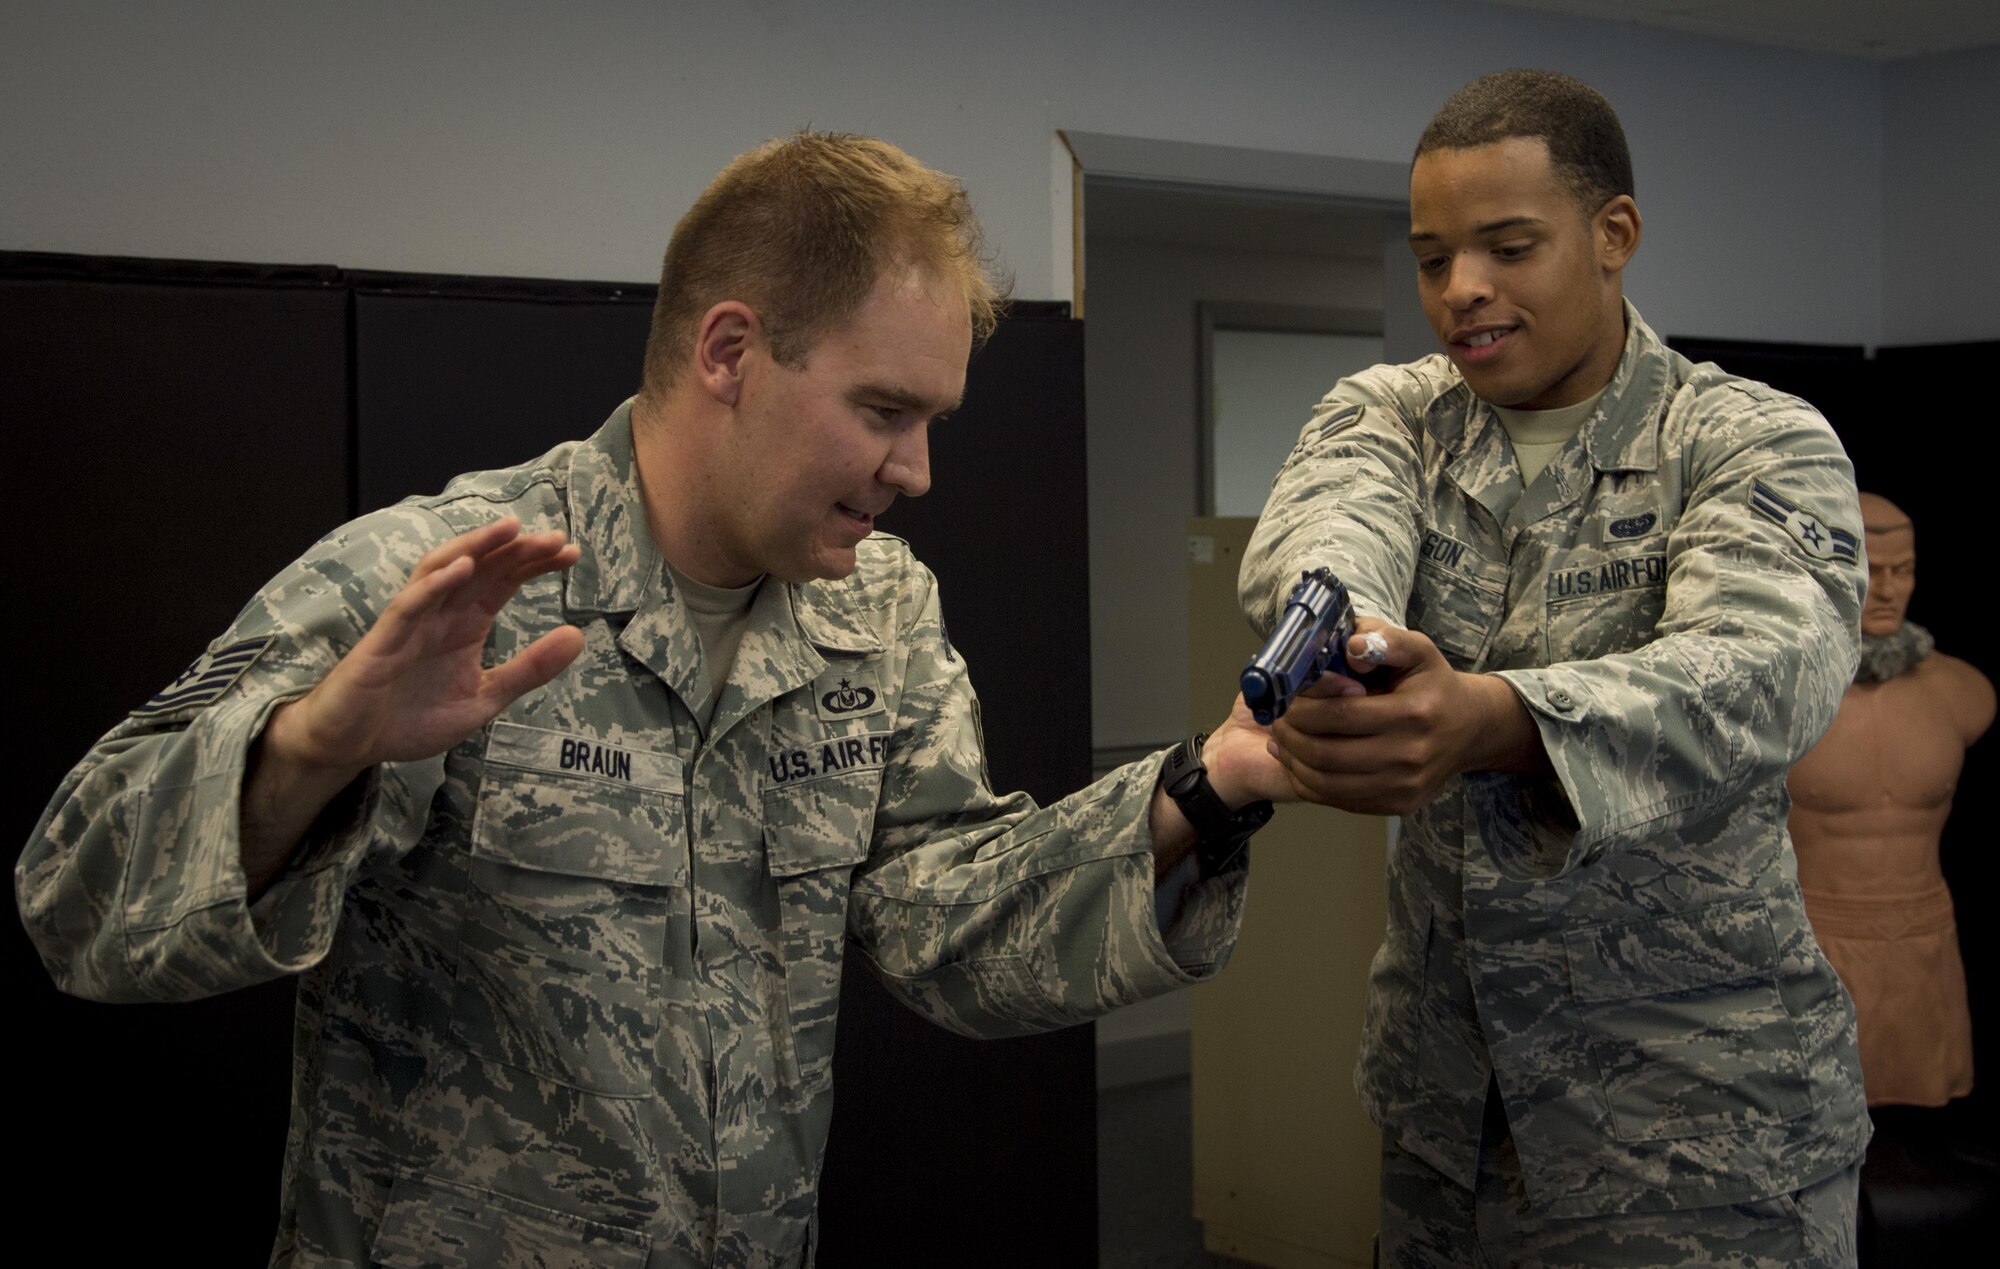 U.S. Air Force Tech. Sgt. Nicklaus Braun, left, the Survival, Evasion, Resistance and Escape (SERE) program manager assigned to the 6th Operations Support Squadron, shows Airman 1st Class Keith Hickson Jr., a cable and antenna maintenance technician assigned to the 6th Communications Squadron, SERE techniques during a Shadow Program at MacDill Air Force Base, Fla. Oct. 18, 2017. Each month, Airmen from various squadrons visit each other for typically a day as a part of the MacDill Shadow Program. (U.S. Air Force photo by Senior Airman Mariette Adams)